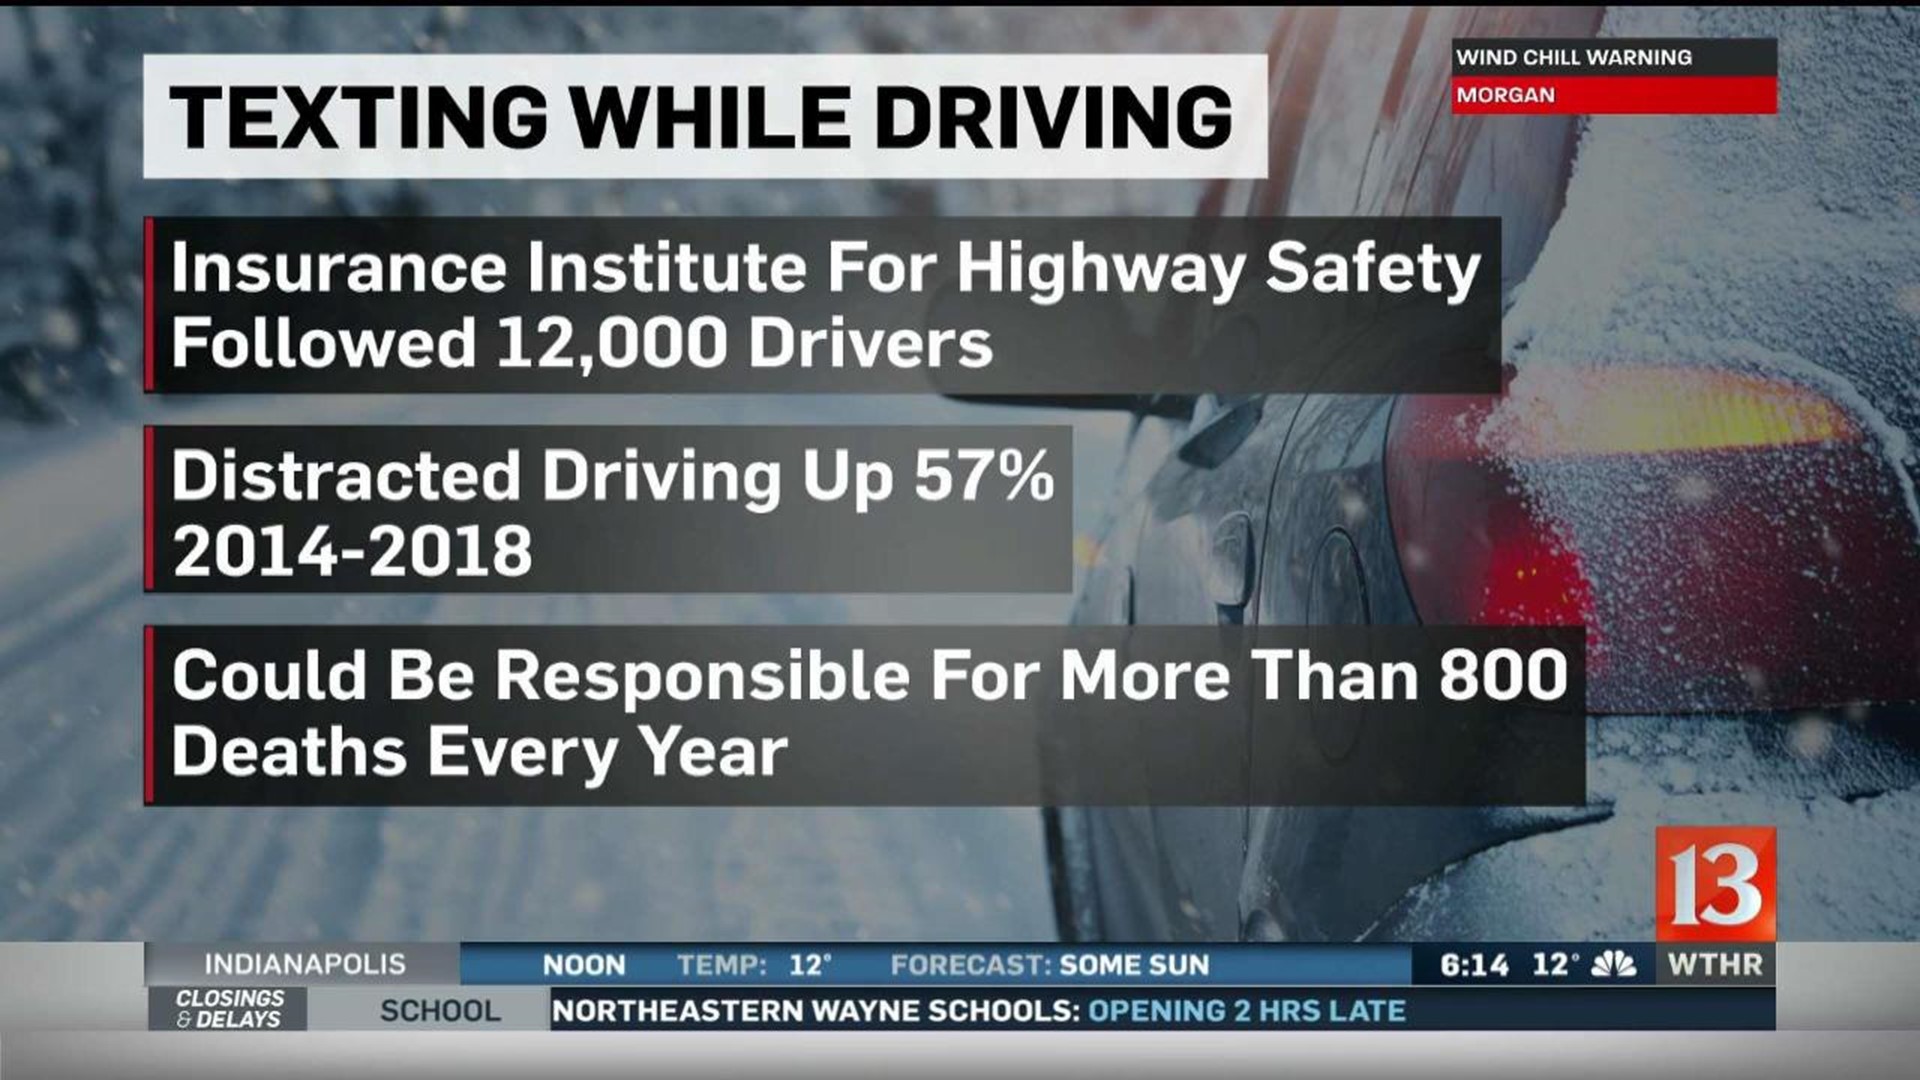 Texting While Drivng Still Deadly